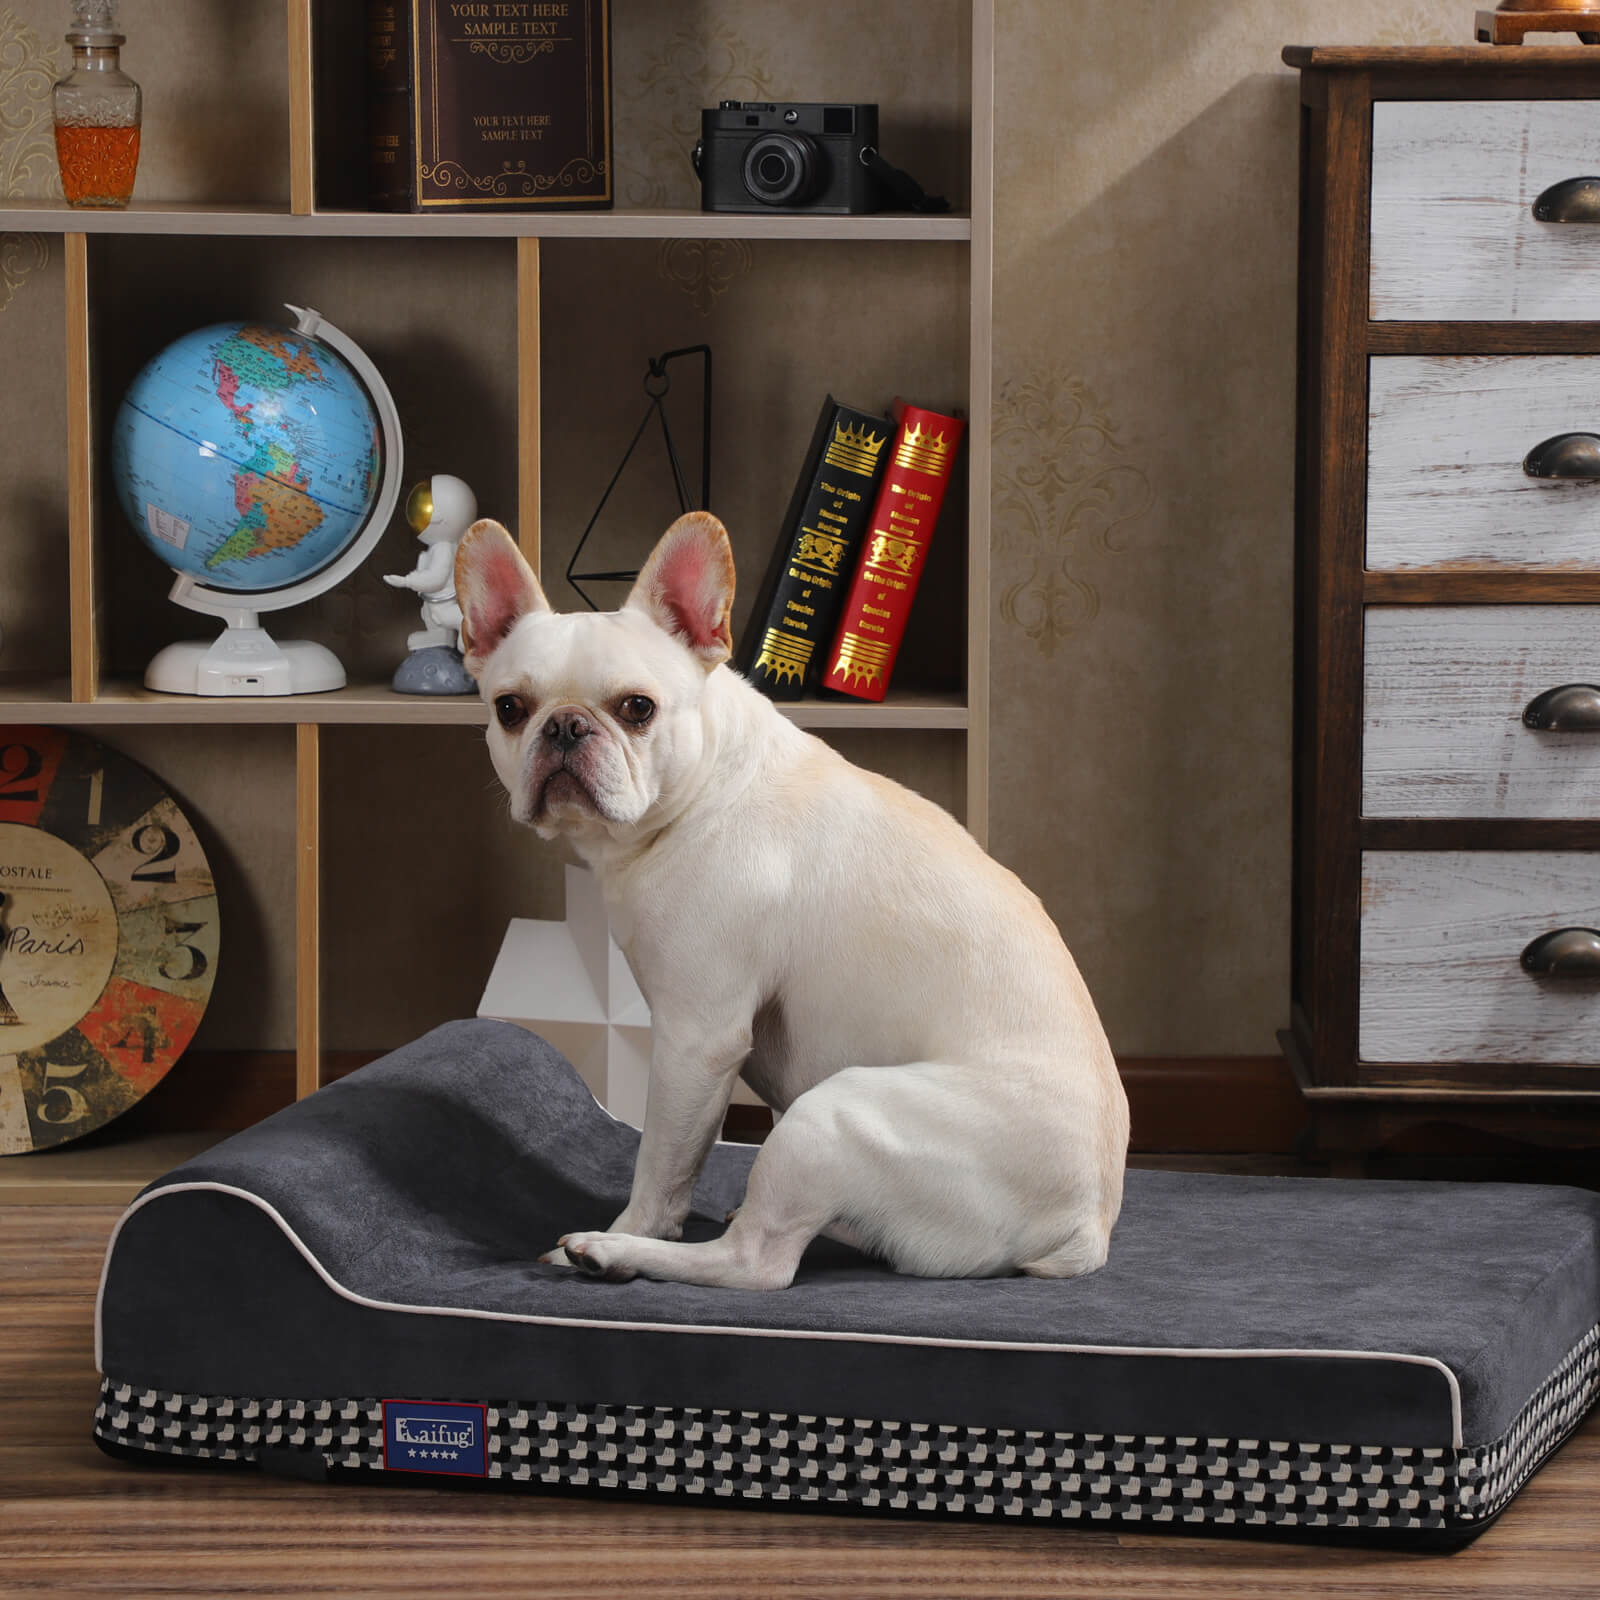 Laifug Single Pillow Dog Bed - memory foam dog bed